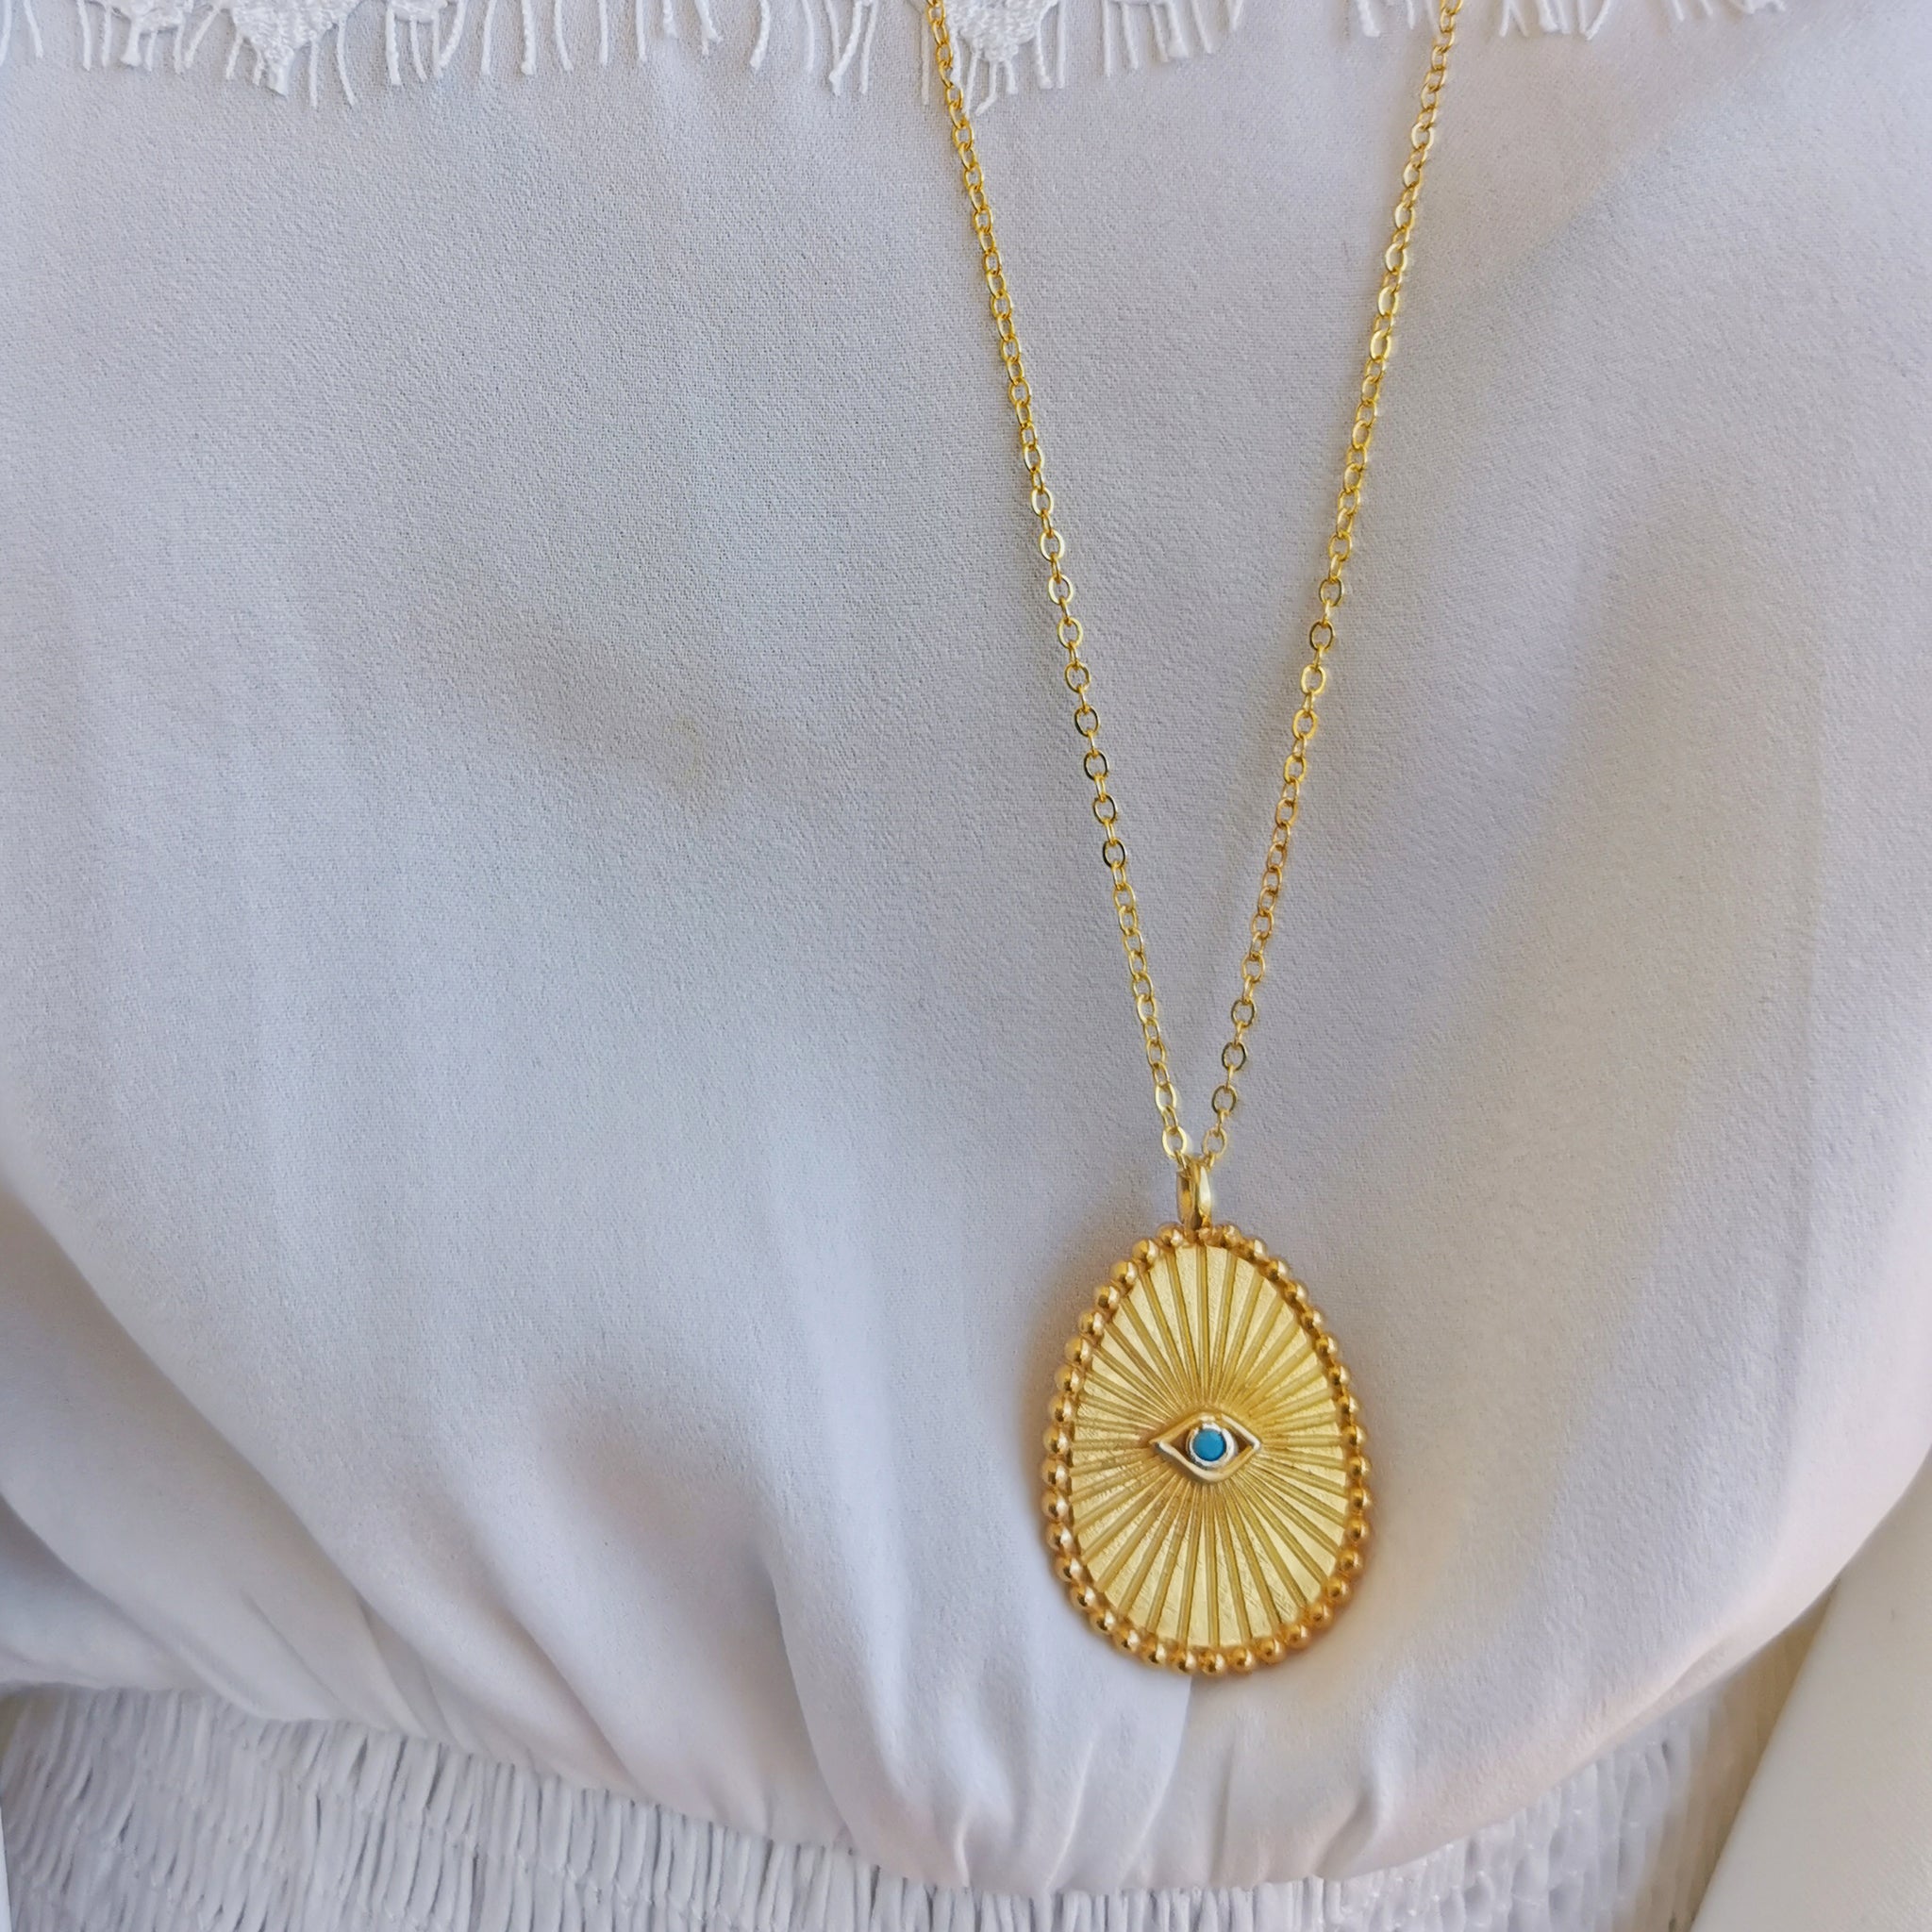 Evil Eye Protection Necklace with an Evil Eye Pendant!